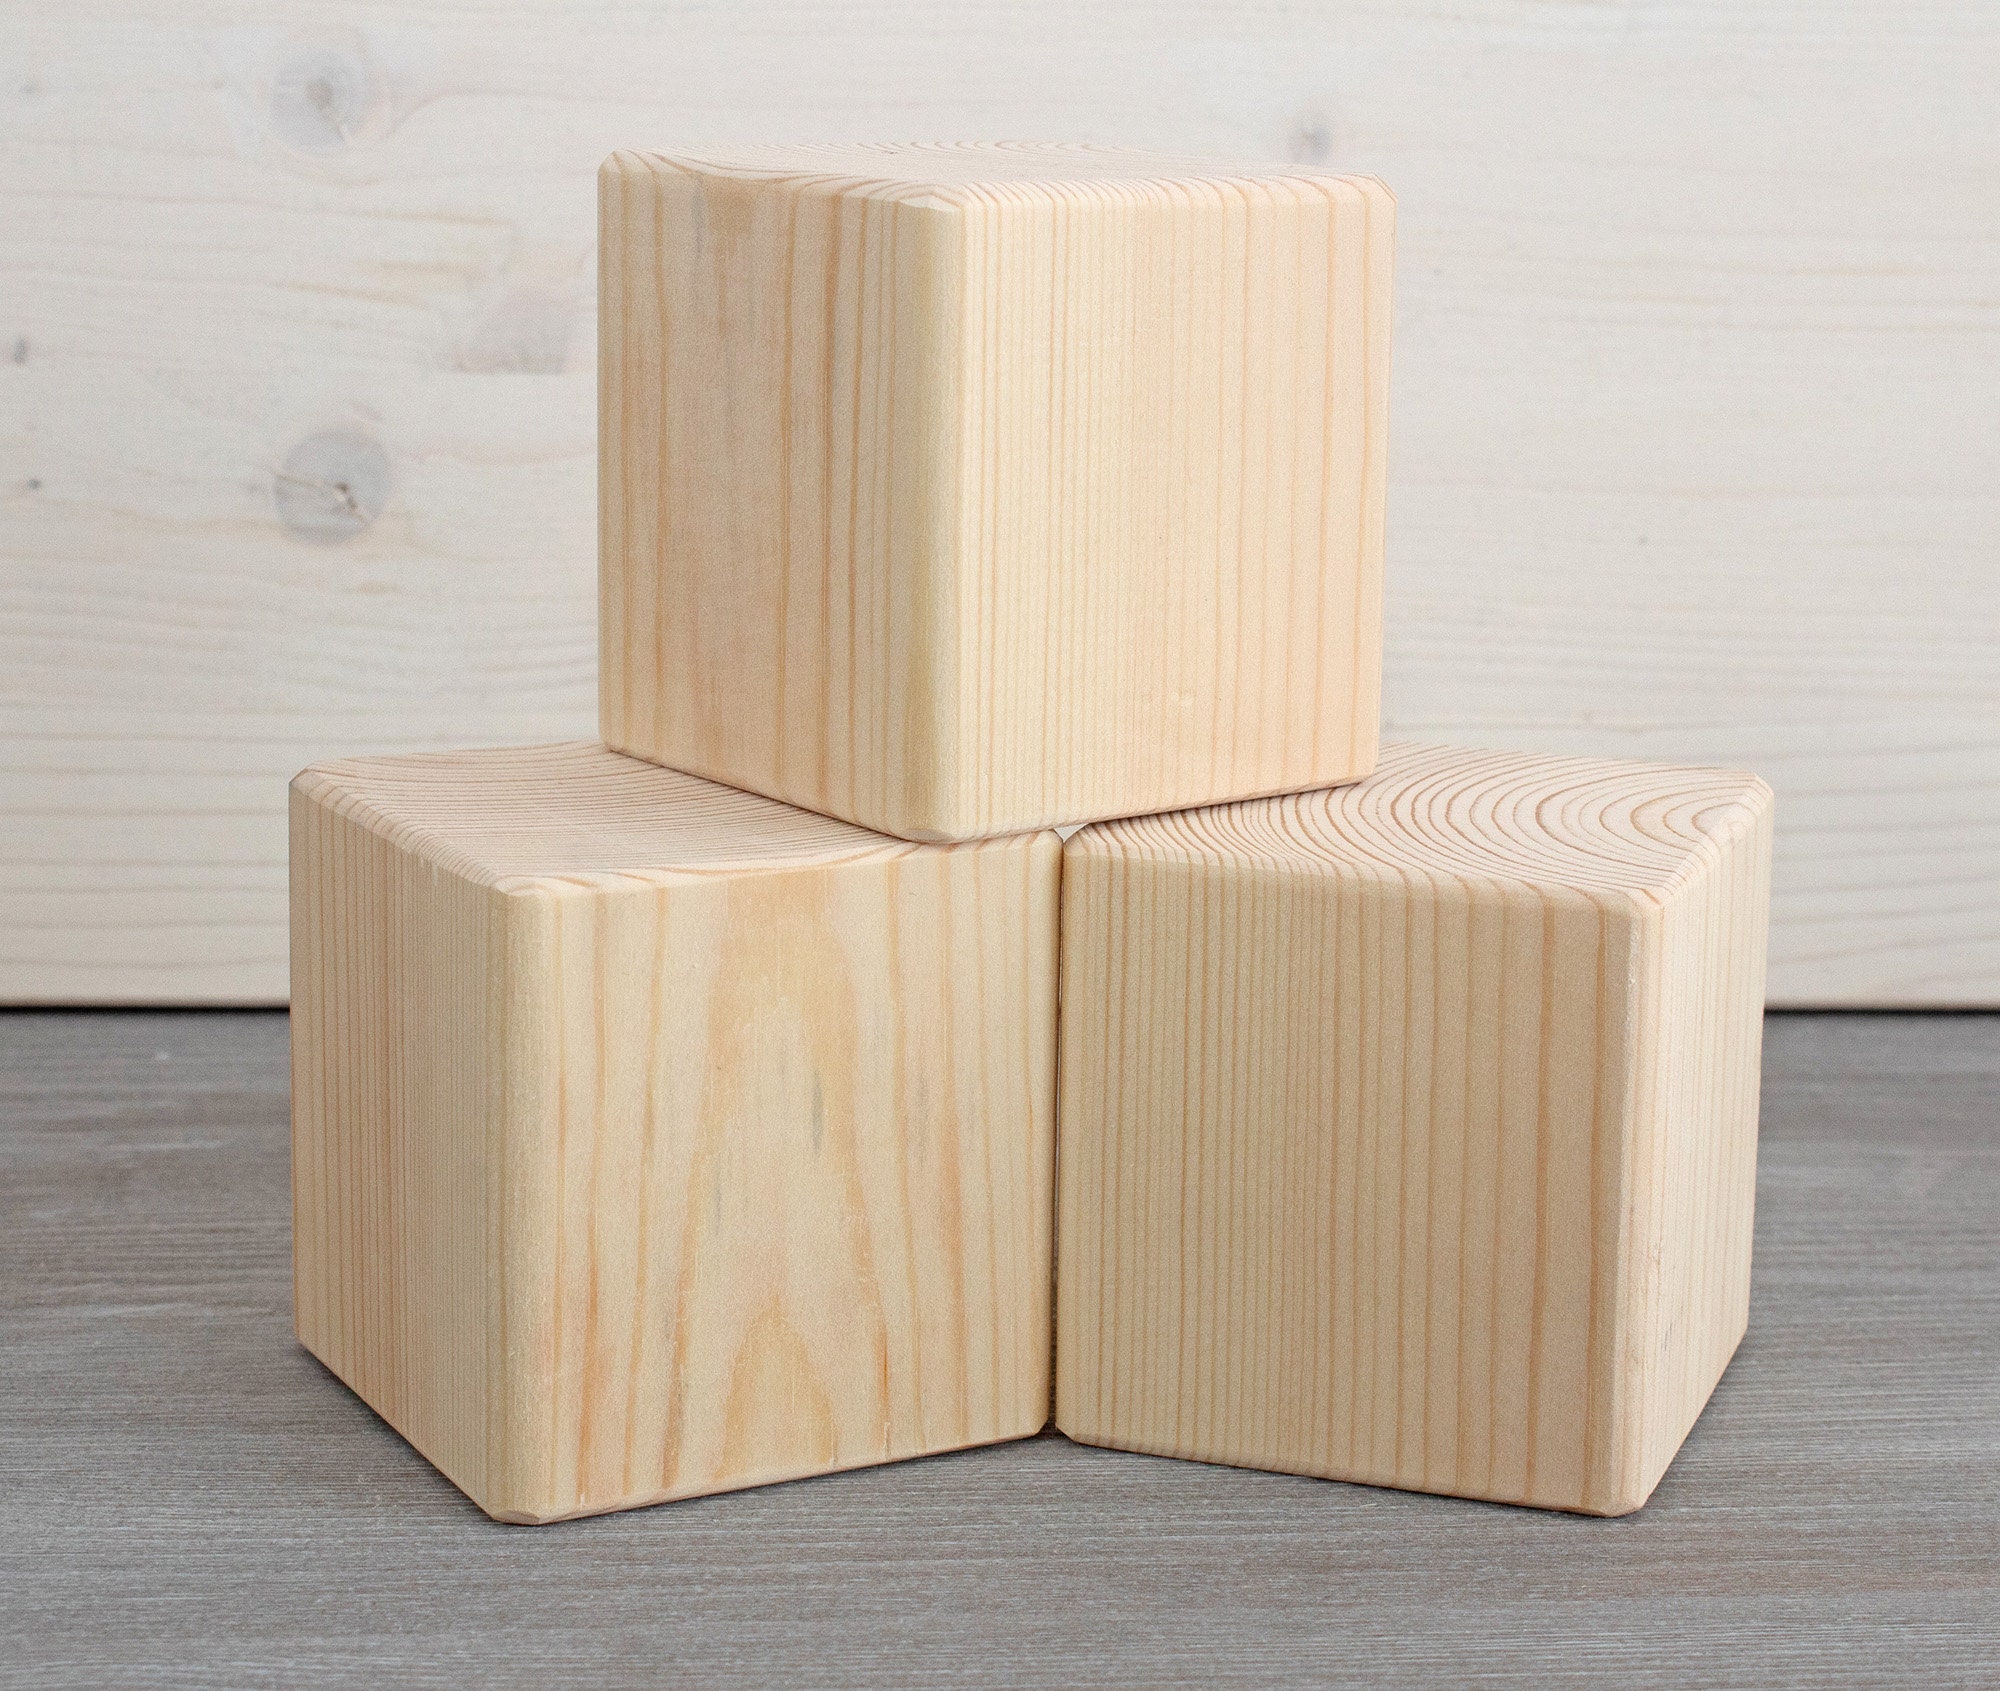 1.5 / 36 PCS Crafting and DIY Projects GYBBER&MUMU Wood Cubes Unfinished Wood Plain Square Blocks for Painting and Decorating Puzzle Making 